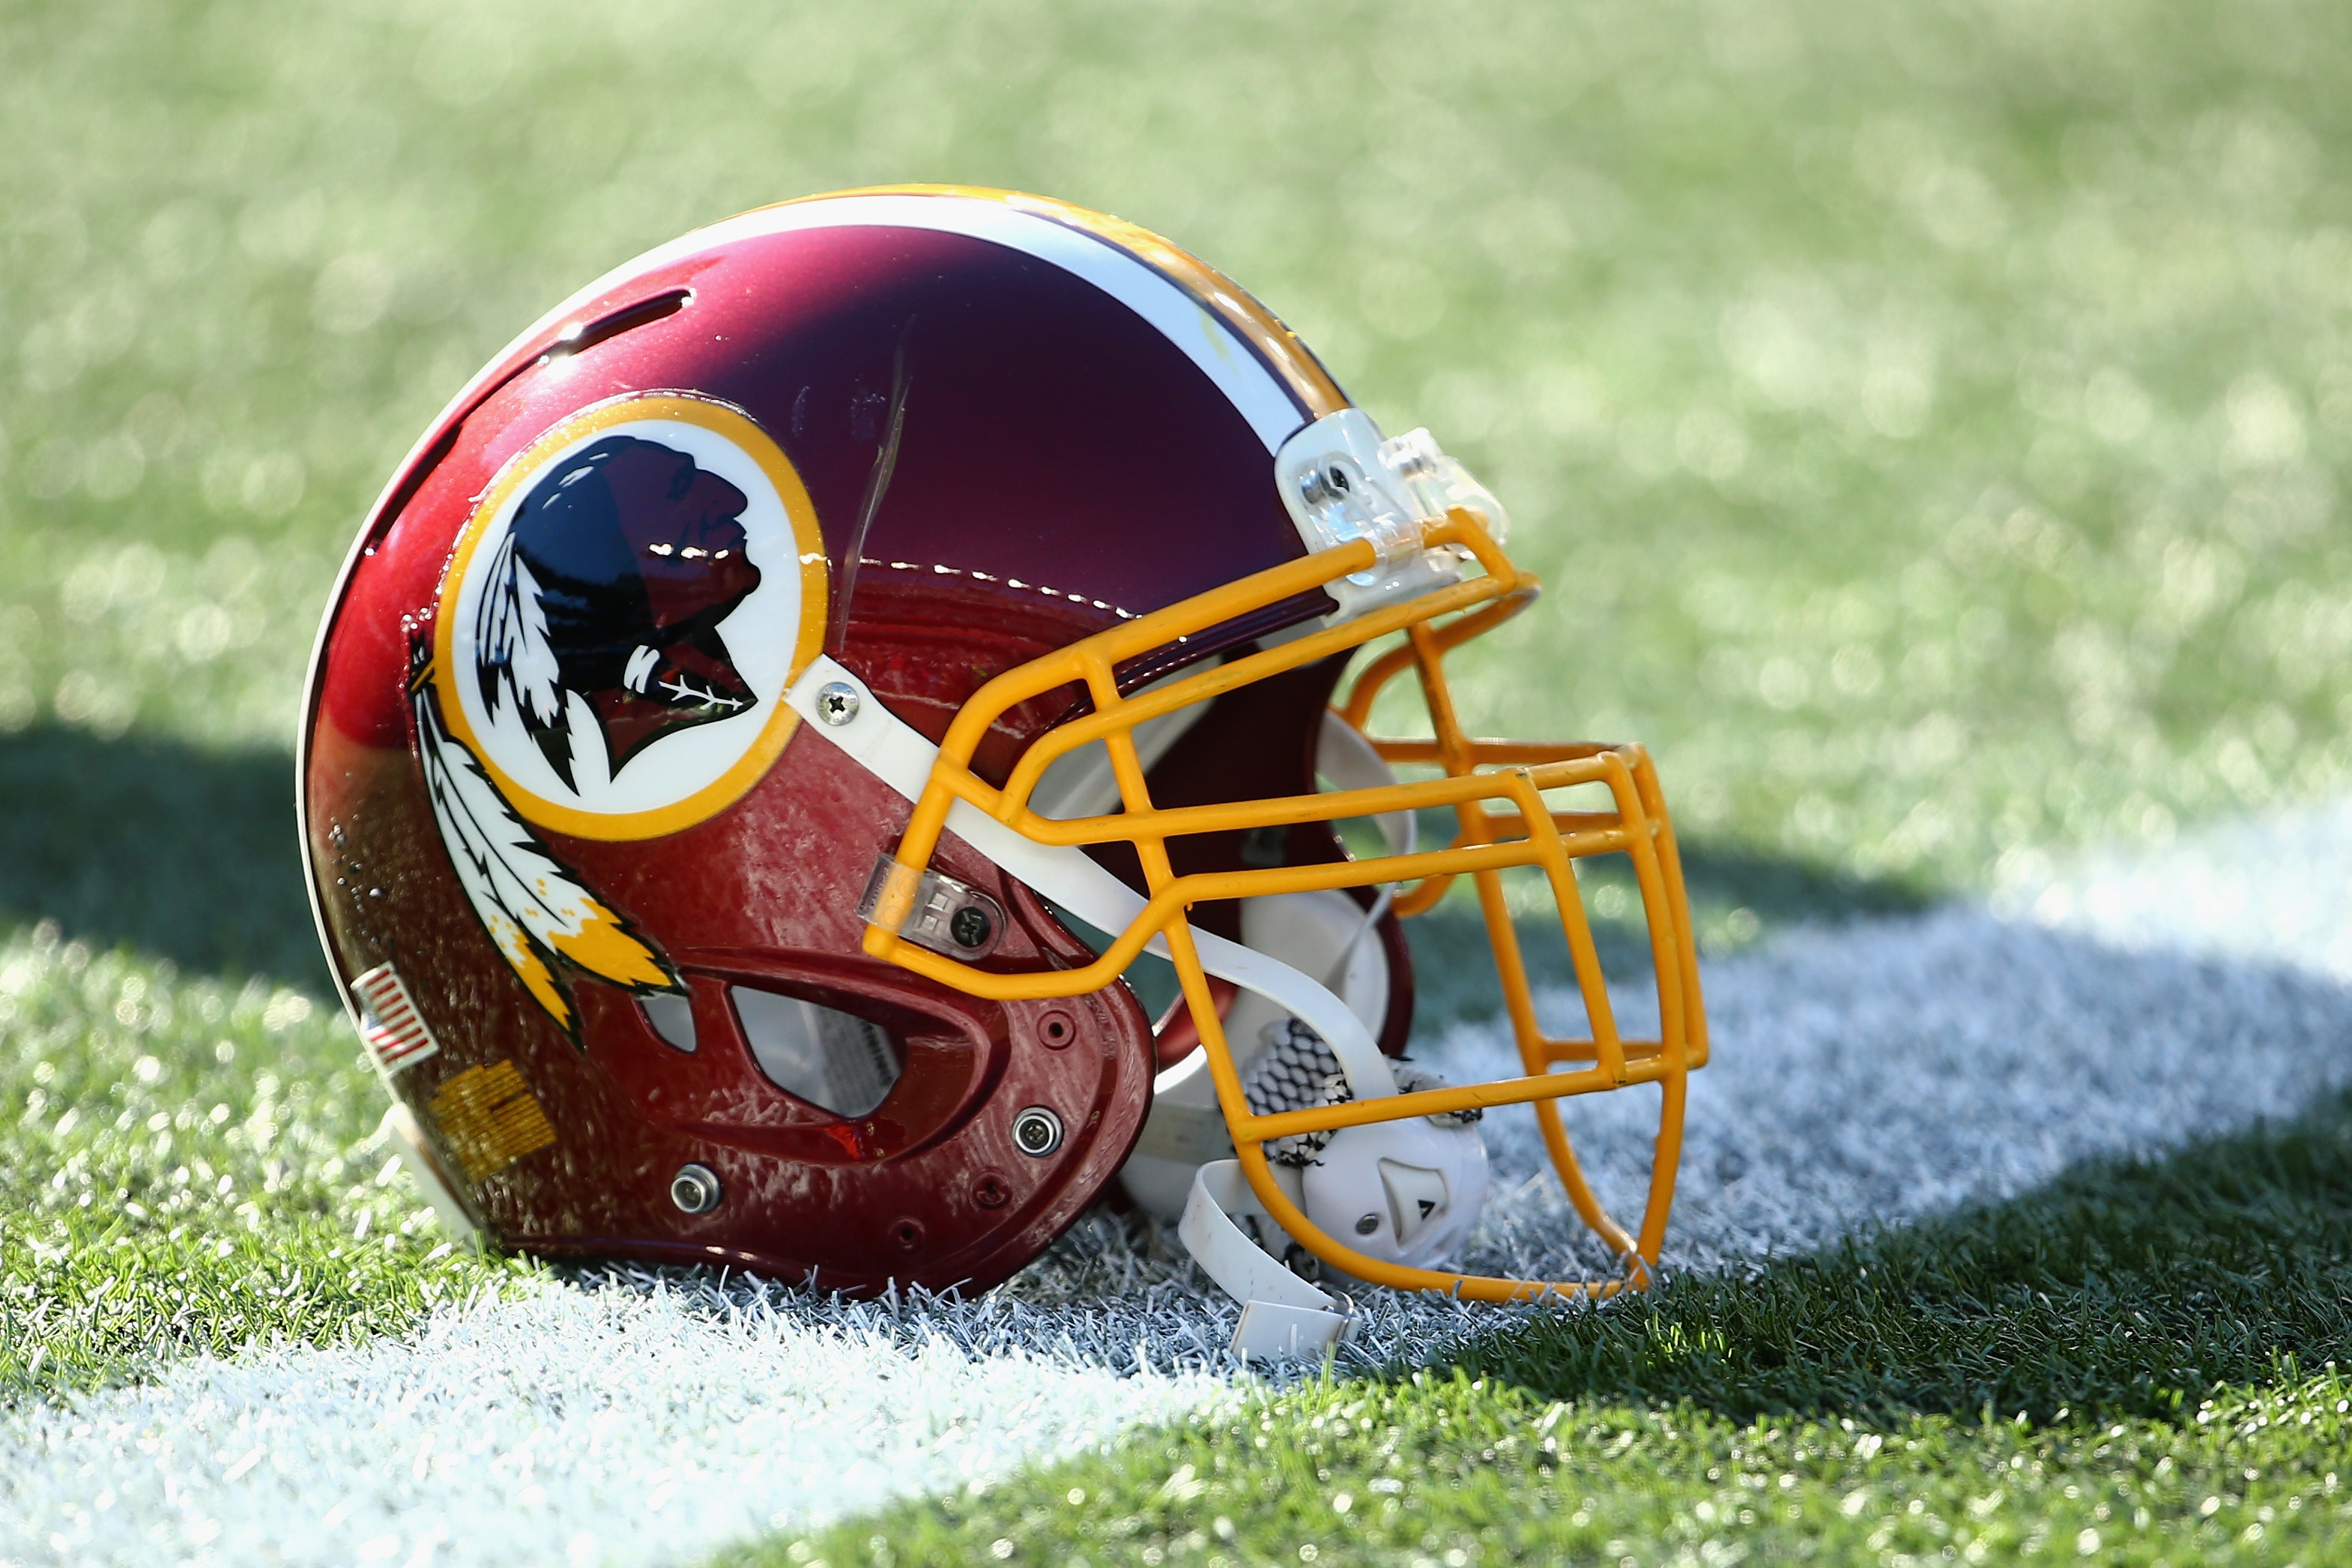 A Washington Redskins helmet before the game against the New England Patriots at Gillette Stadium on November 8, 2015 in Foxboro, Massachusetts. (Maddie Meyer&mdash;Getty Images)